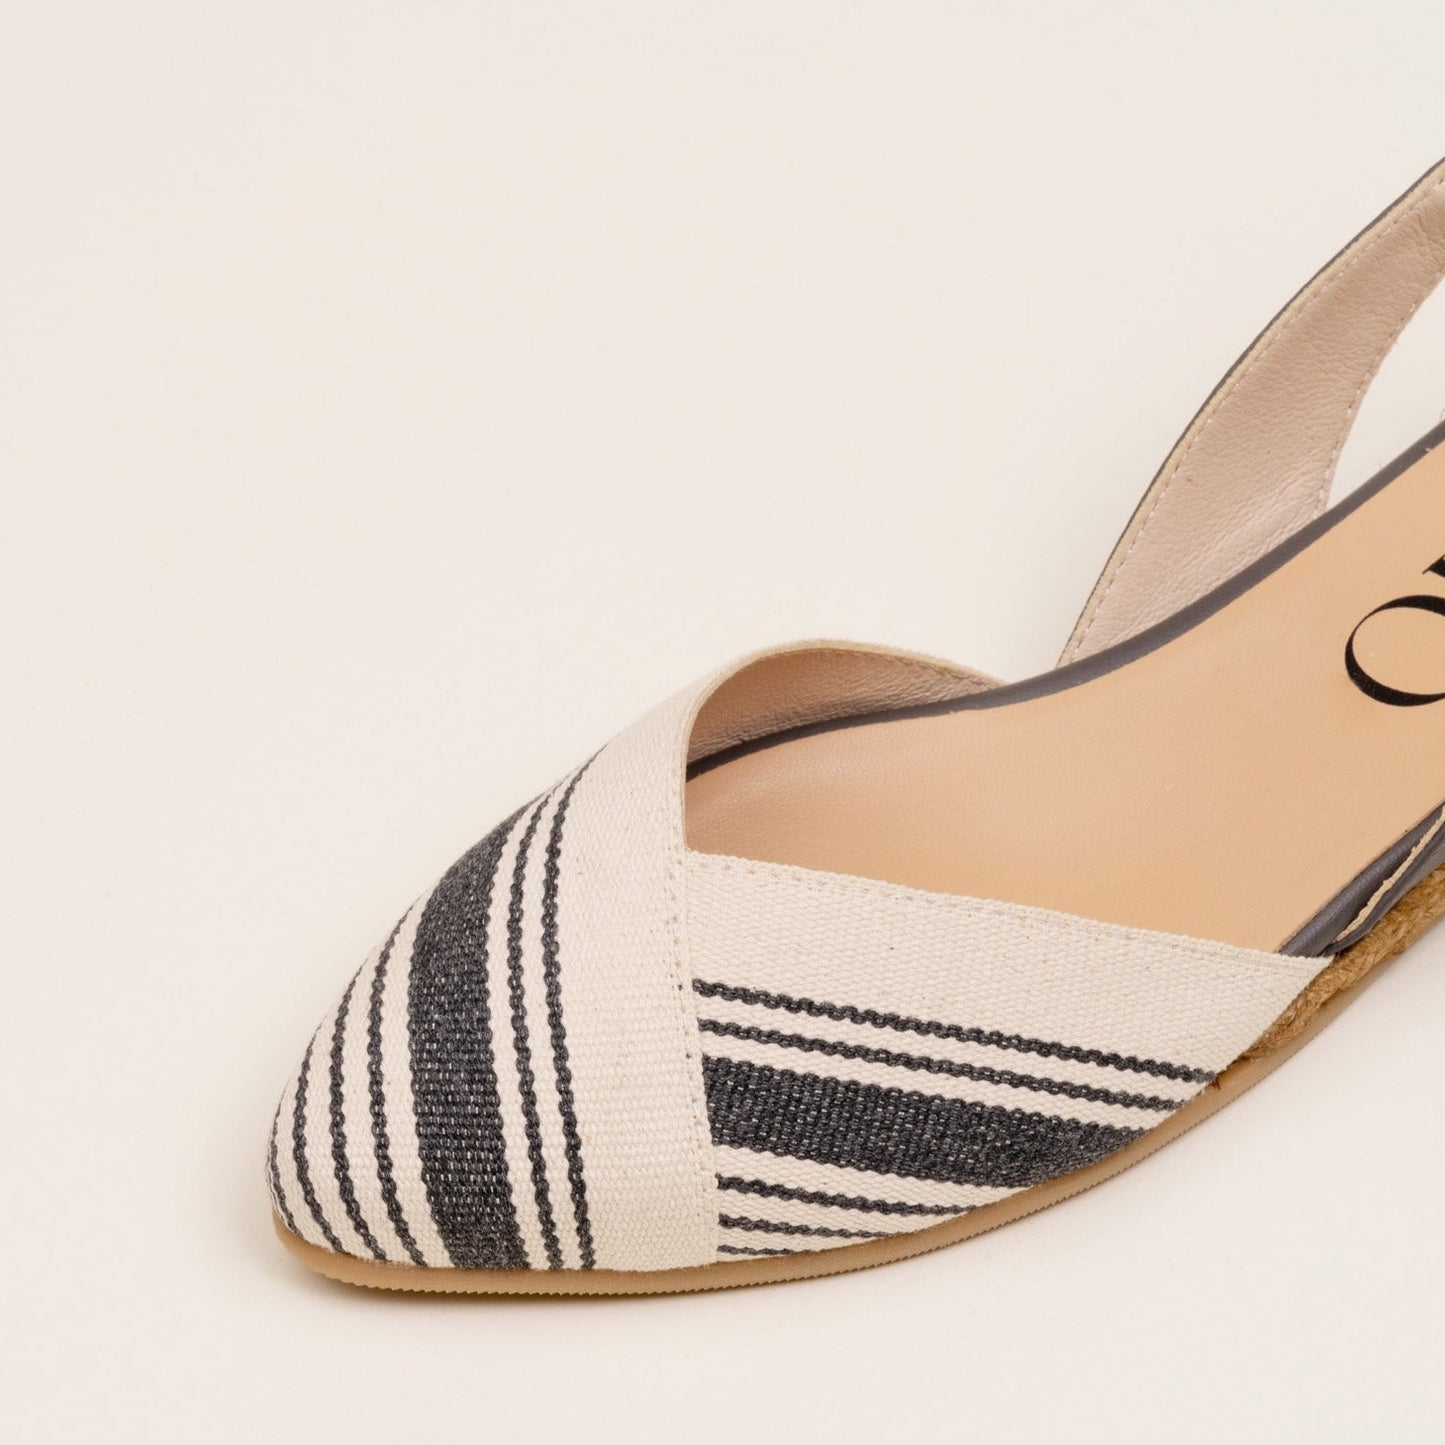 Sandals handmade espadrilles in jute, canvas and leather in grey and off white colour